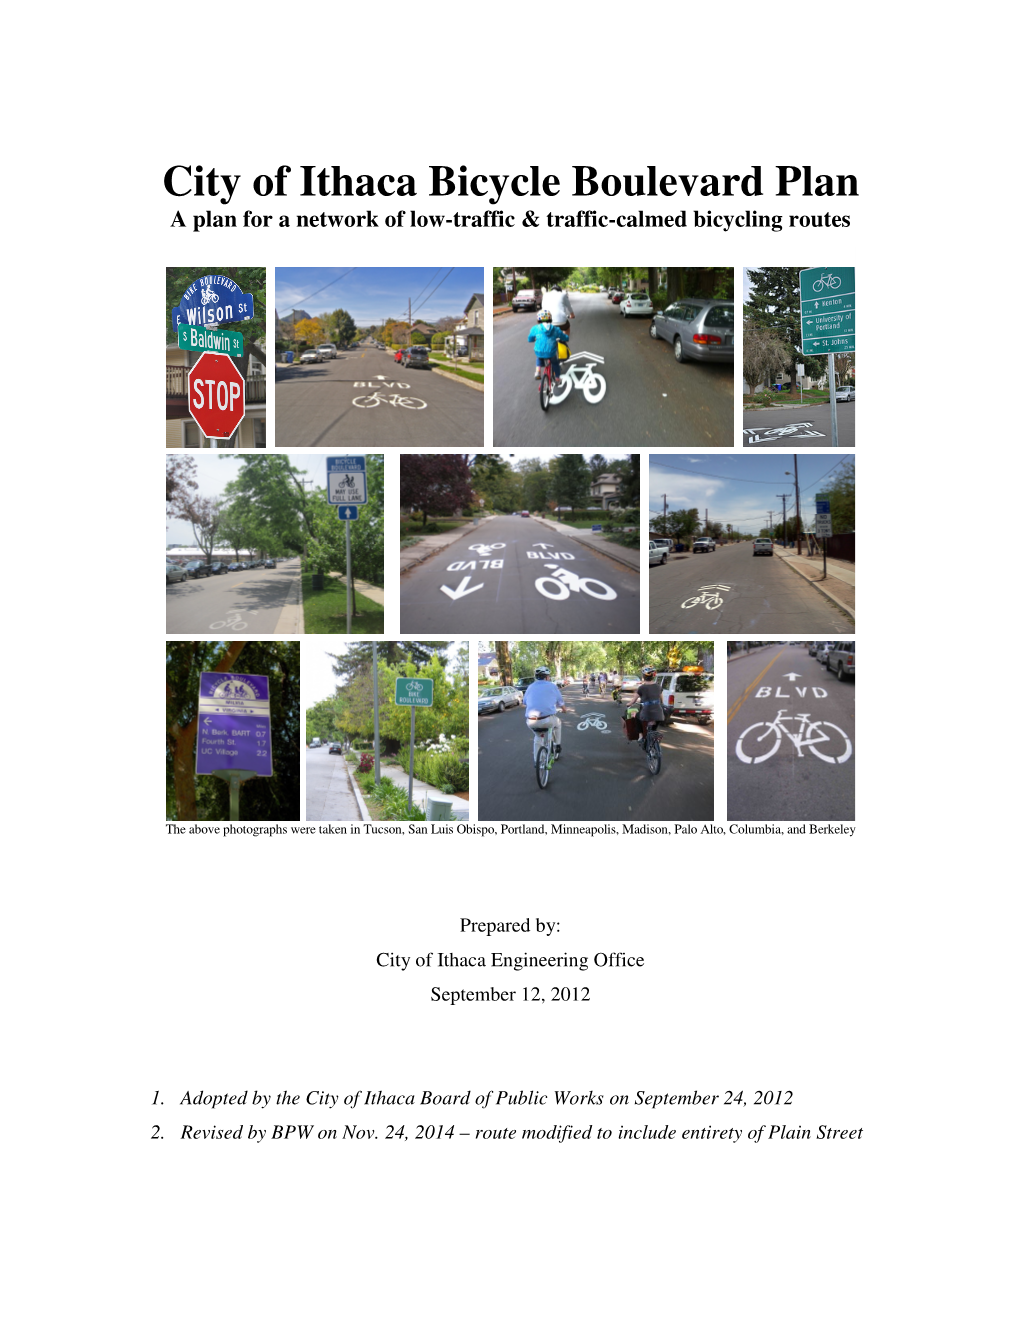 City of Ithaca Bicycle Boulevard Plan a Plan for a Network of Low-Traffic & Traffic-Calmed Bicycling Routes